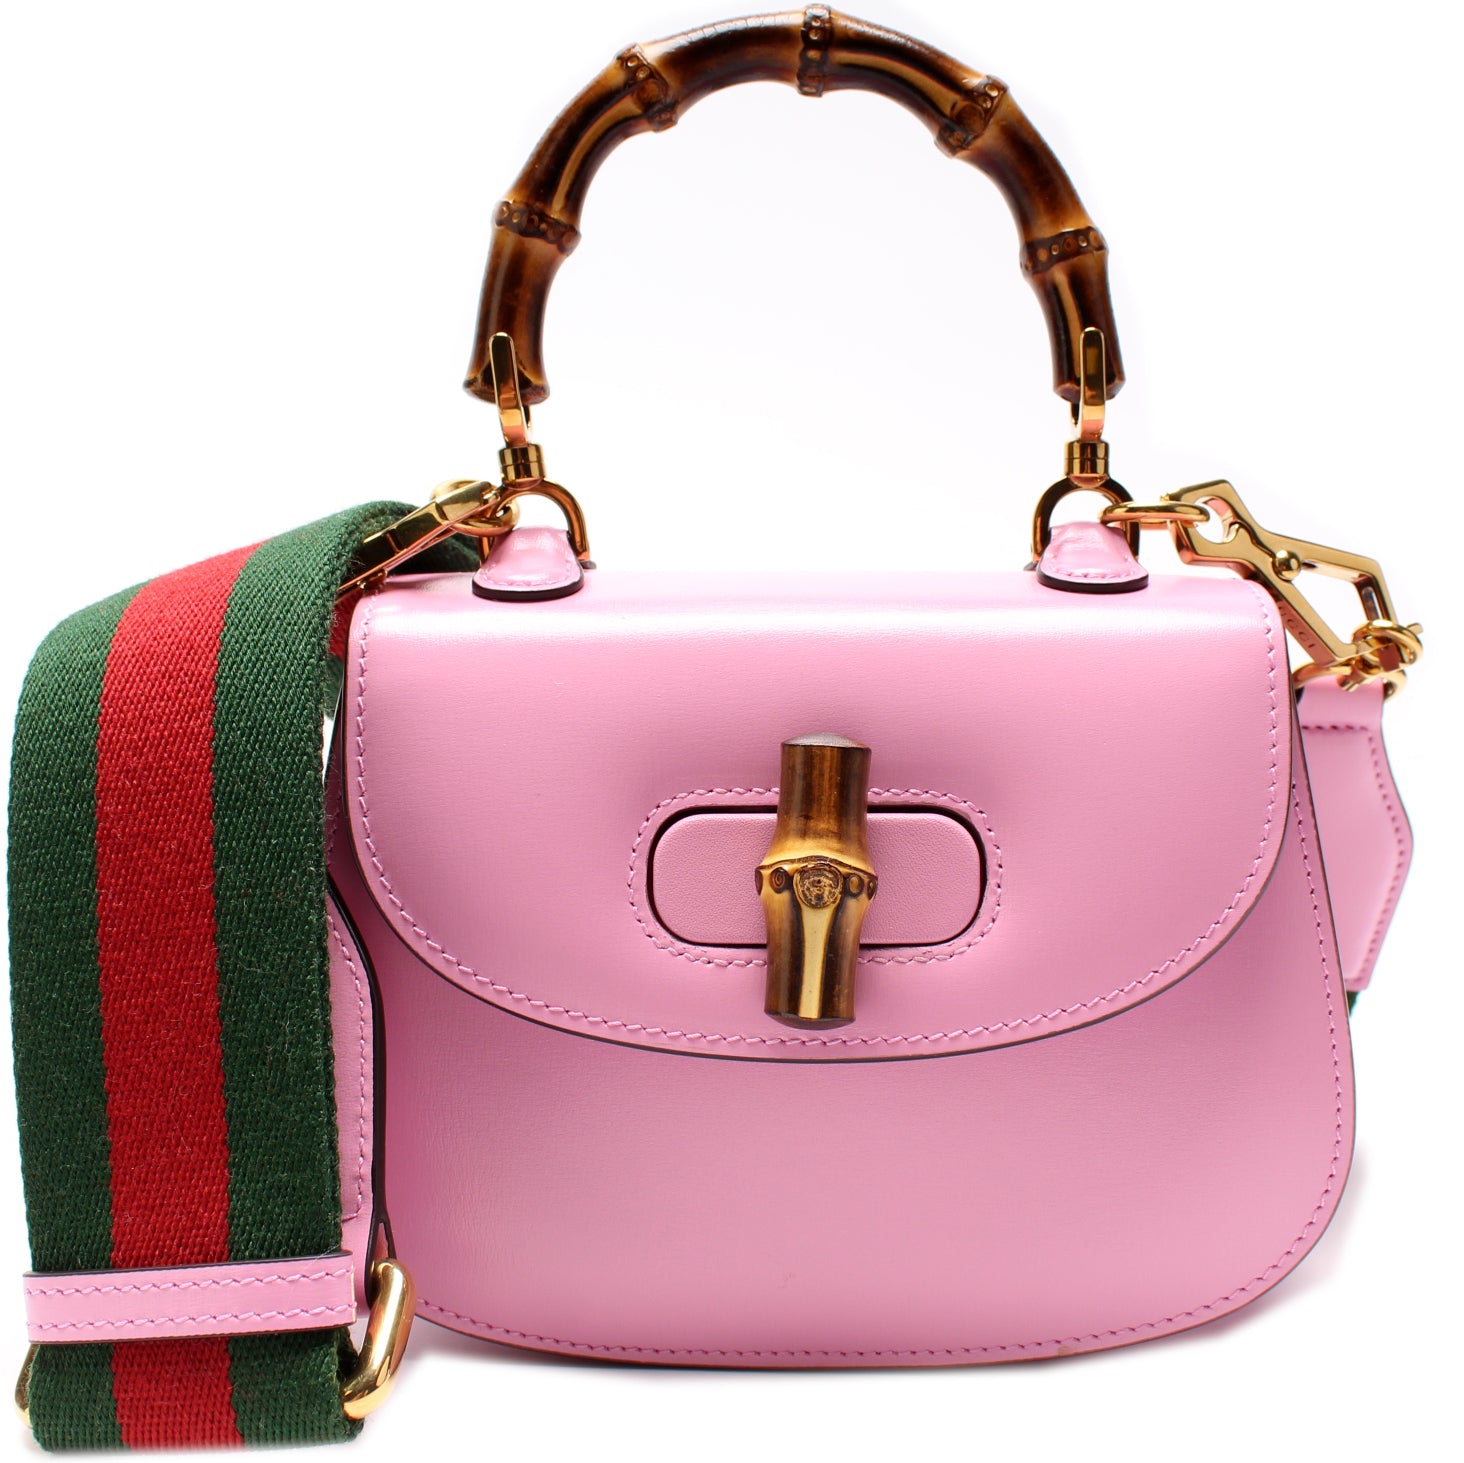 Gucci Bamboo 1947 small top handle bag in pink leather